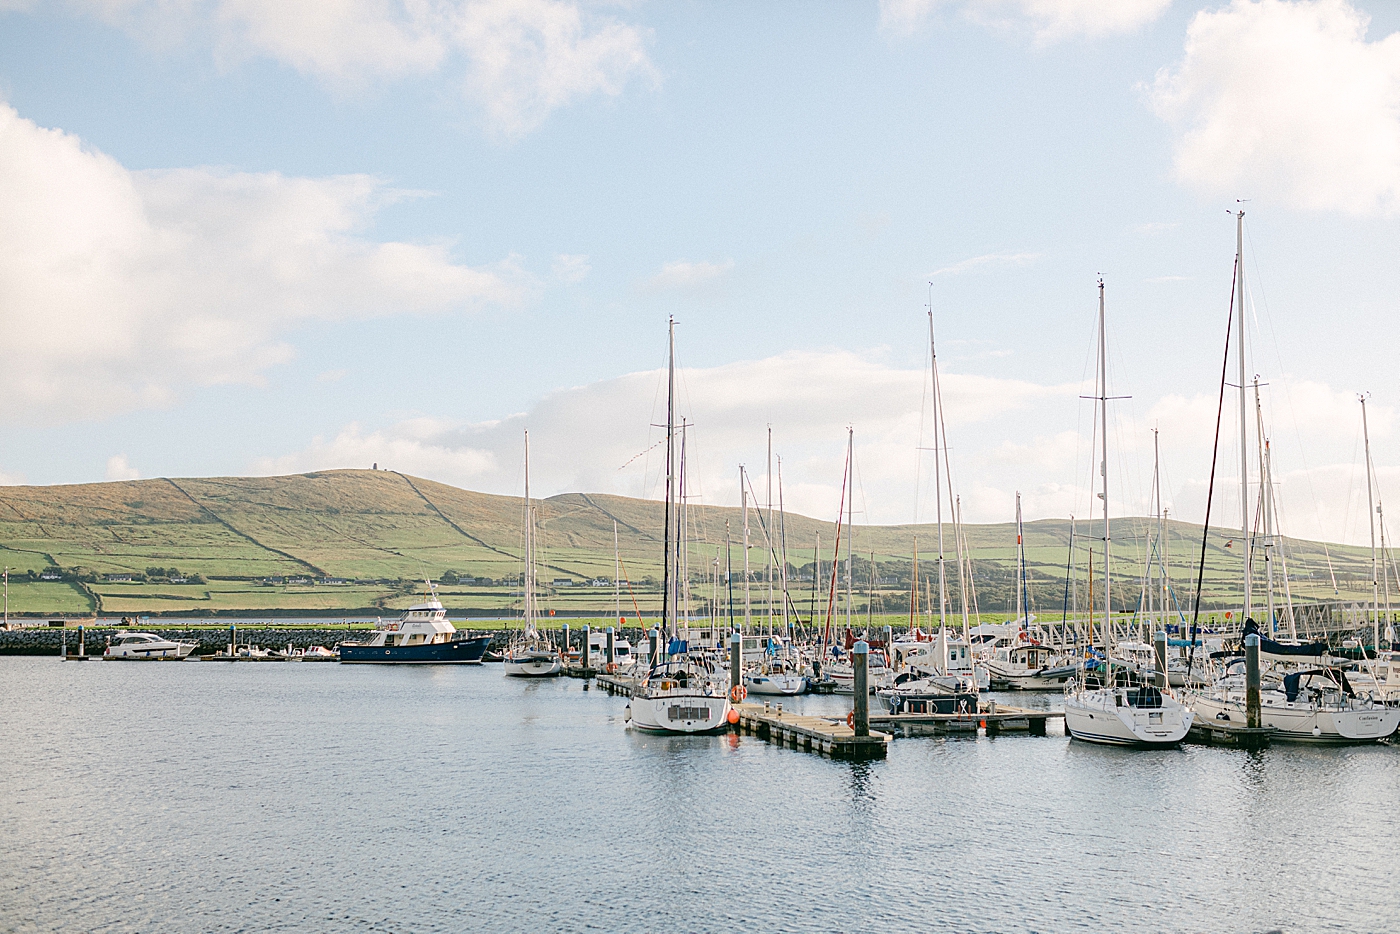 Boats on the coast at Harbor | Photo by Hope Helmuth